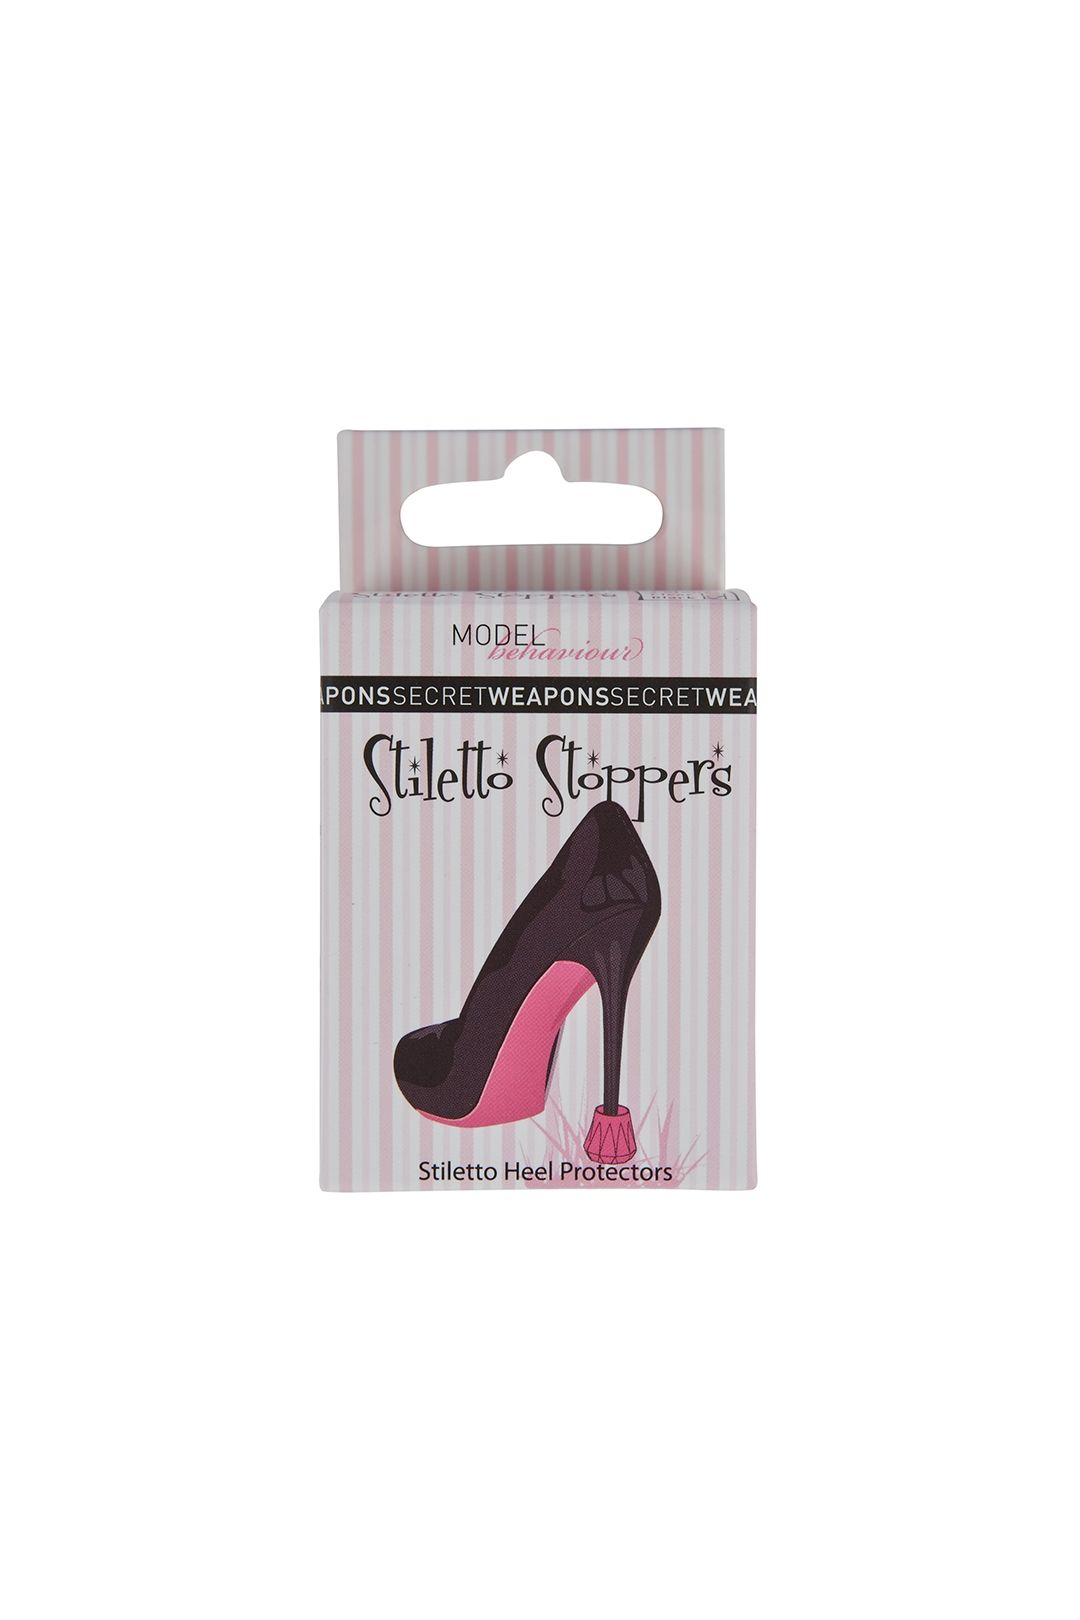 Secret Weapons - Stiletto Stoppers - Clear - Front